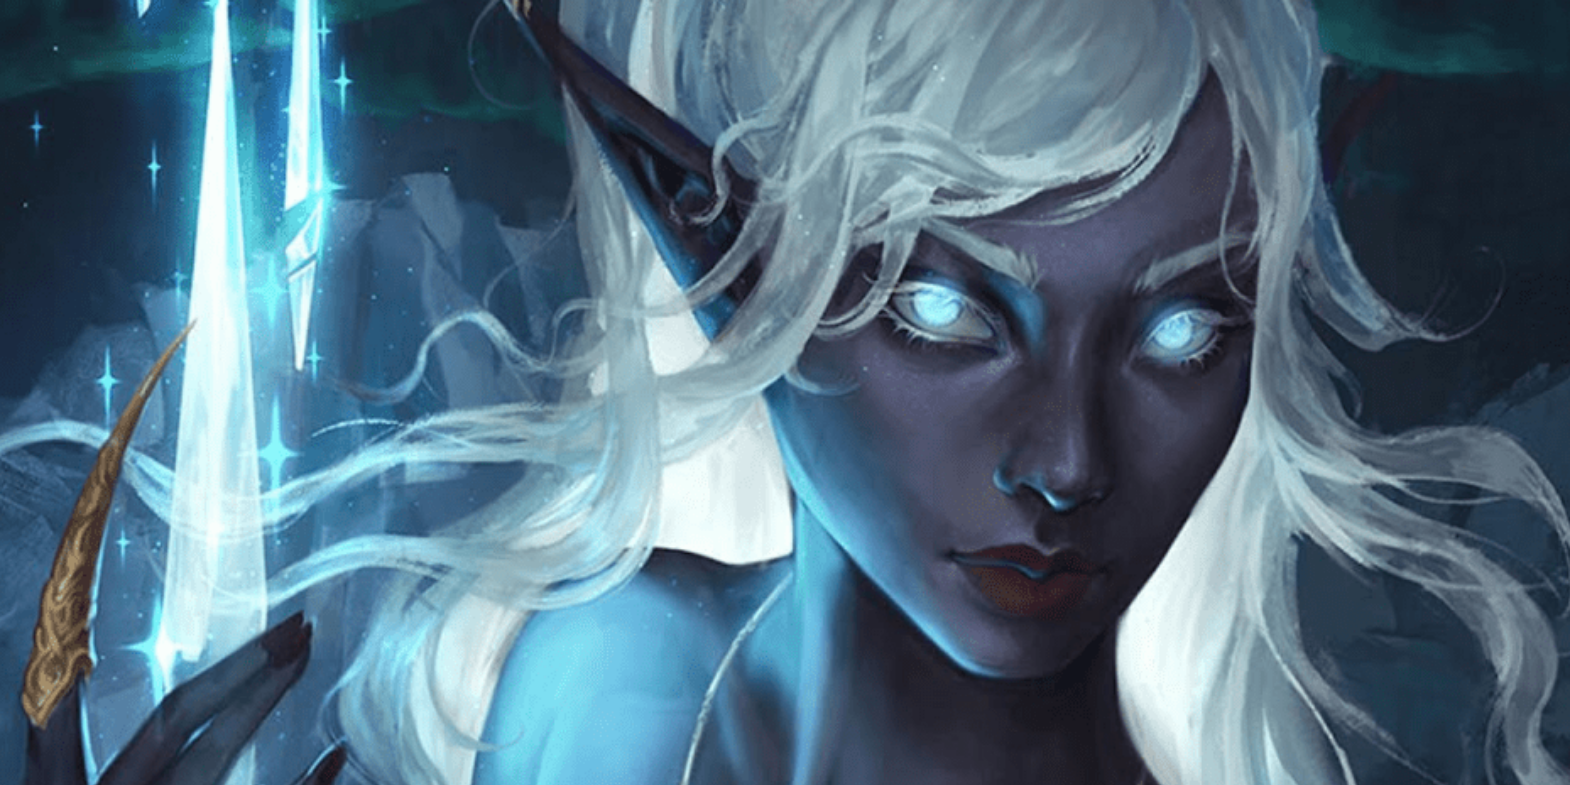 Drow race from dungeons & dragons d&d (2)